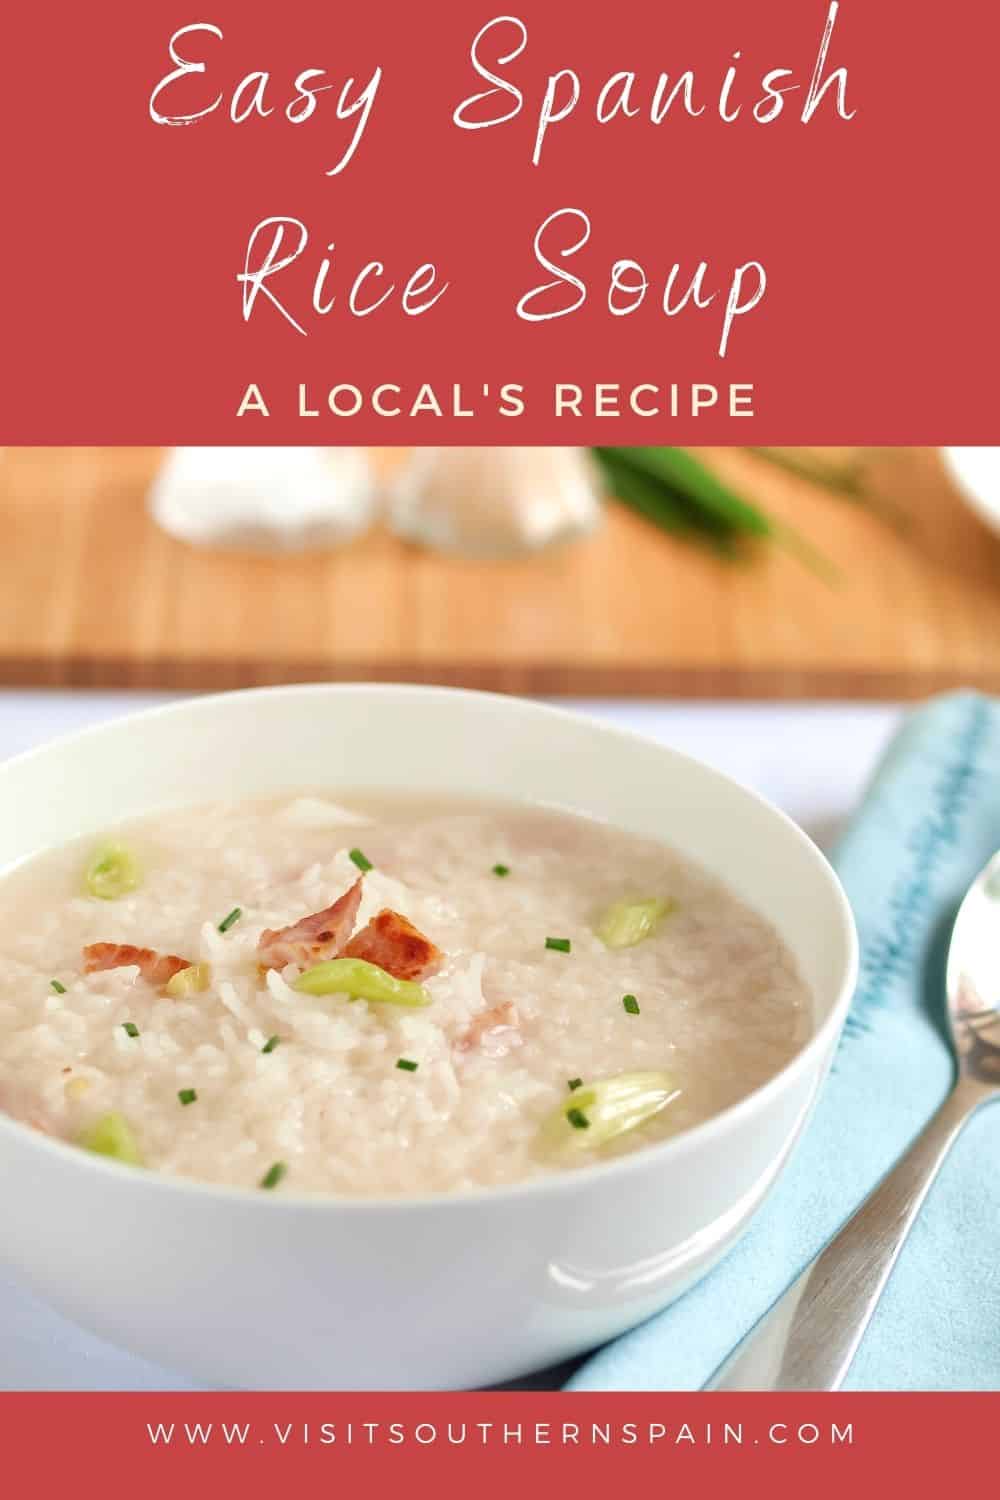 Easy Spanish Rice Soup Recipe - Visit Southern Spain